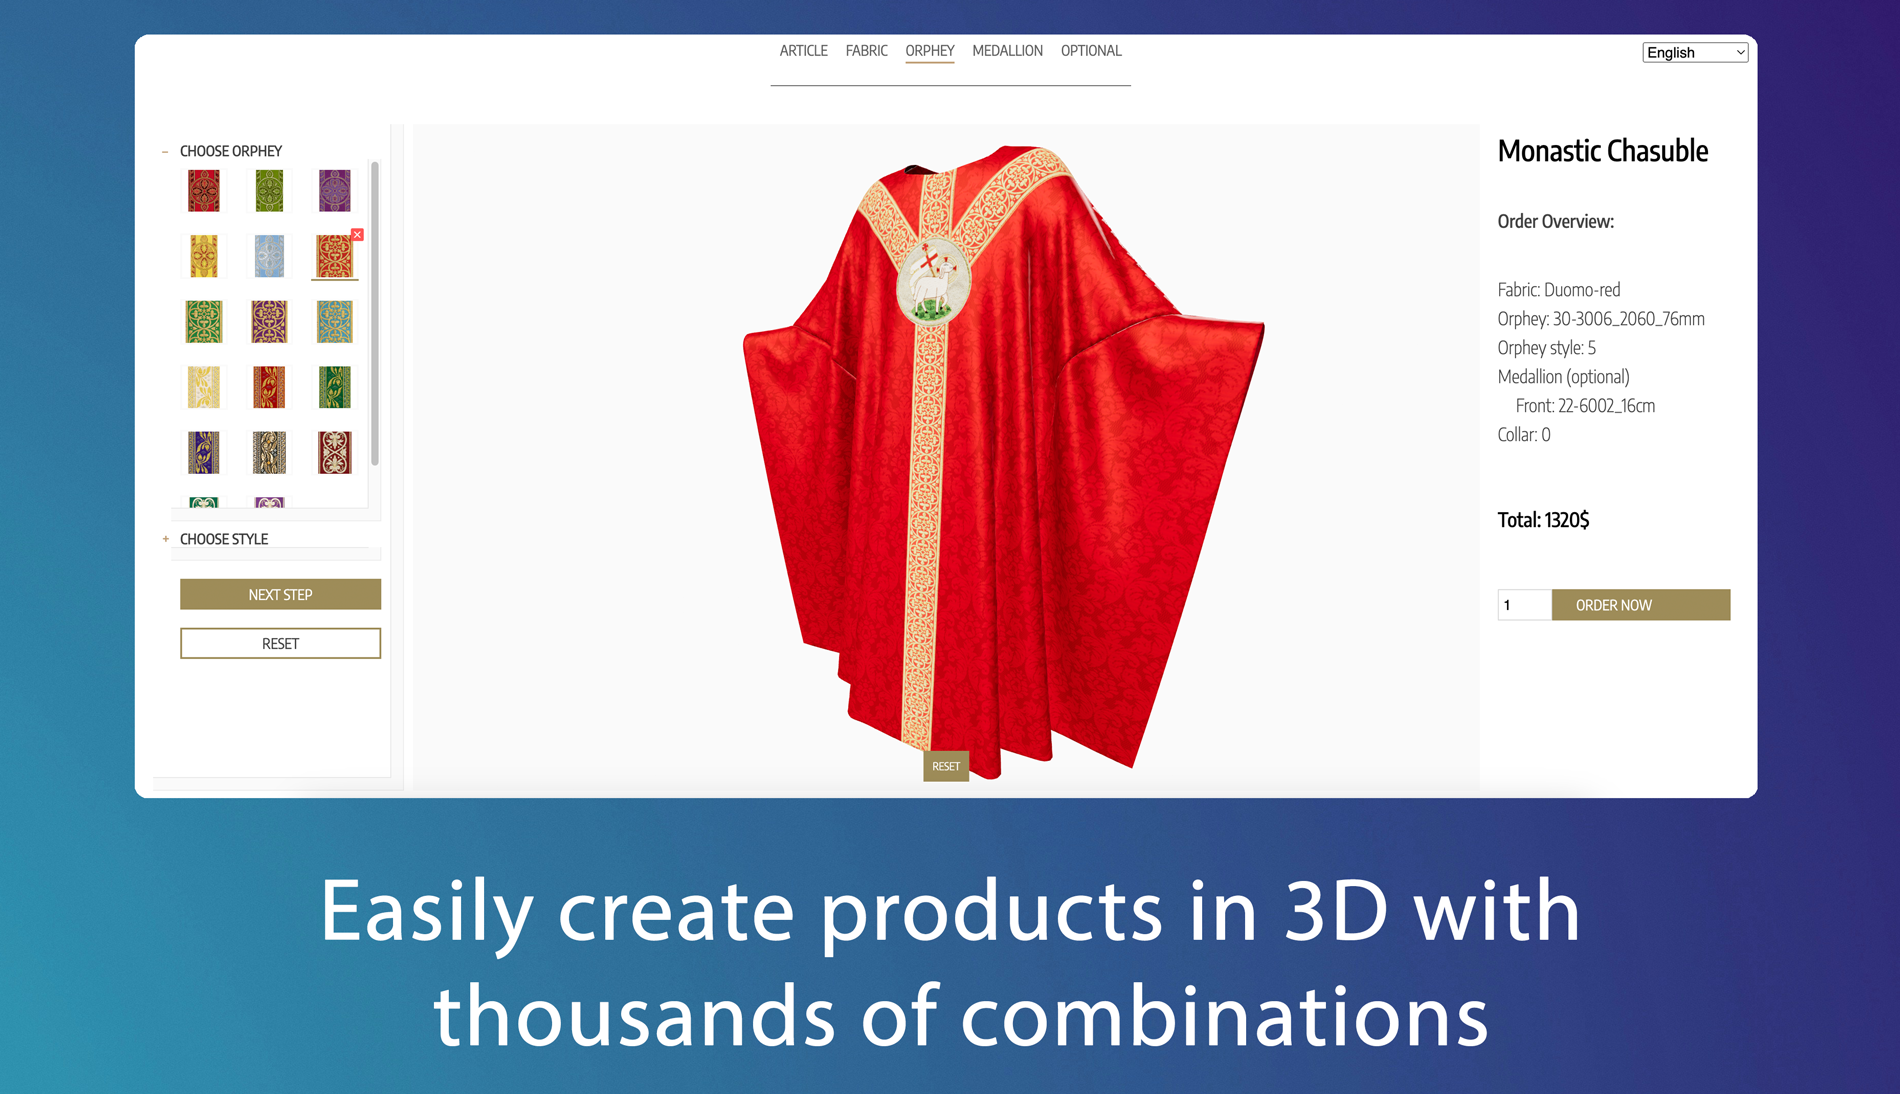 Easily create products in 3D with thousands of combinations